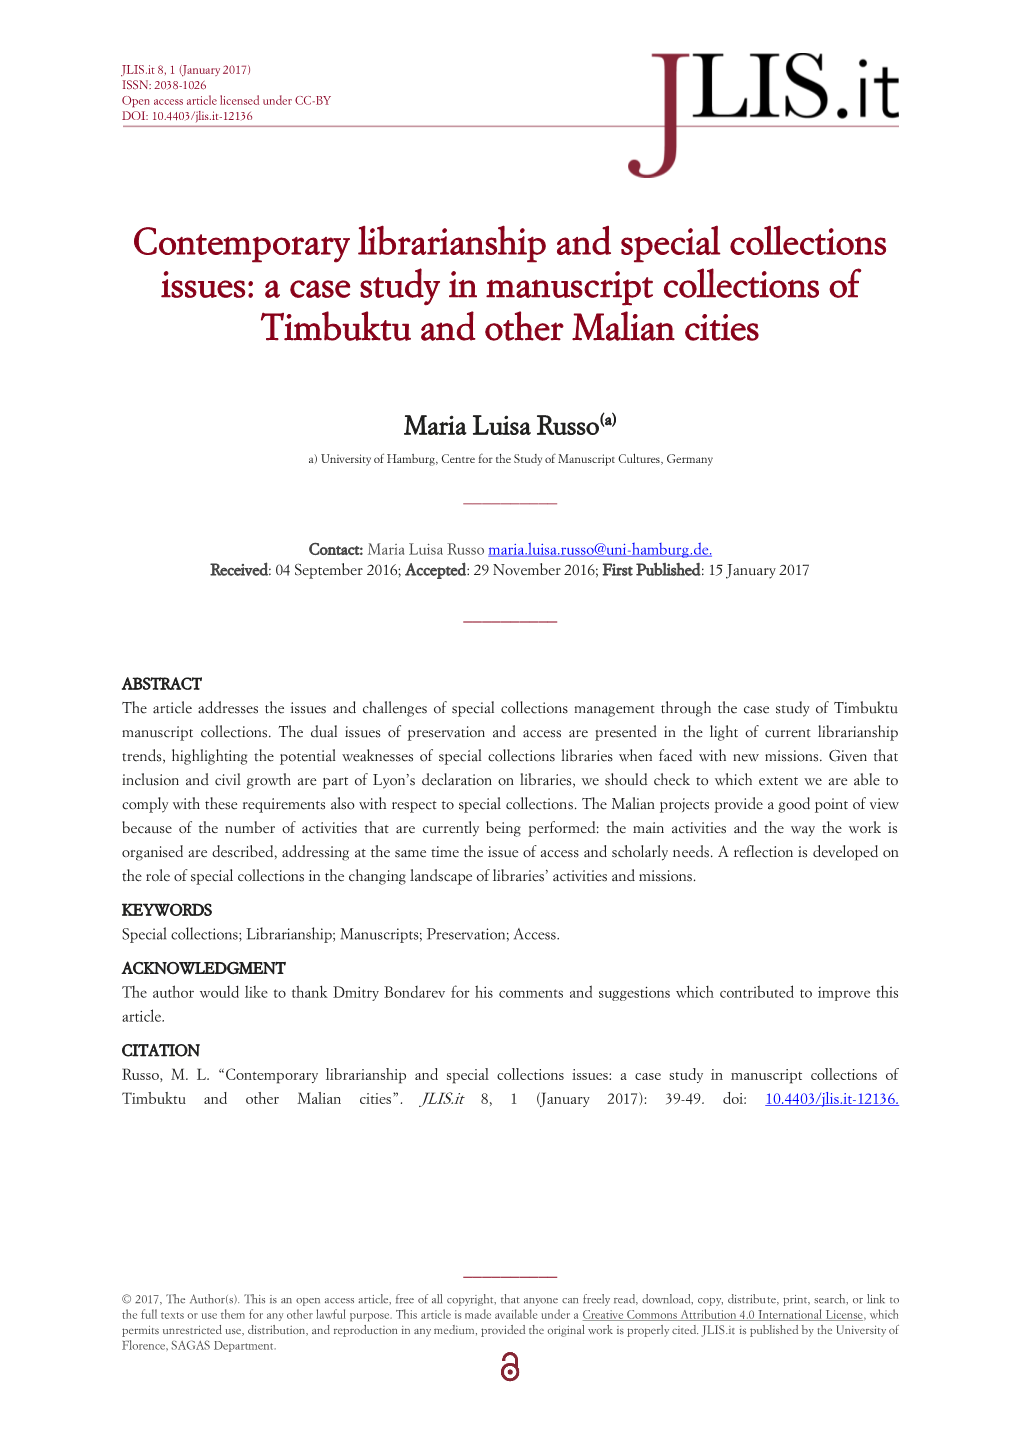 Contemporary Librarianship and Special Collections Issues: a Case Study in Manuscript Collections of Timbuktu and Other Malian Cities